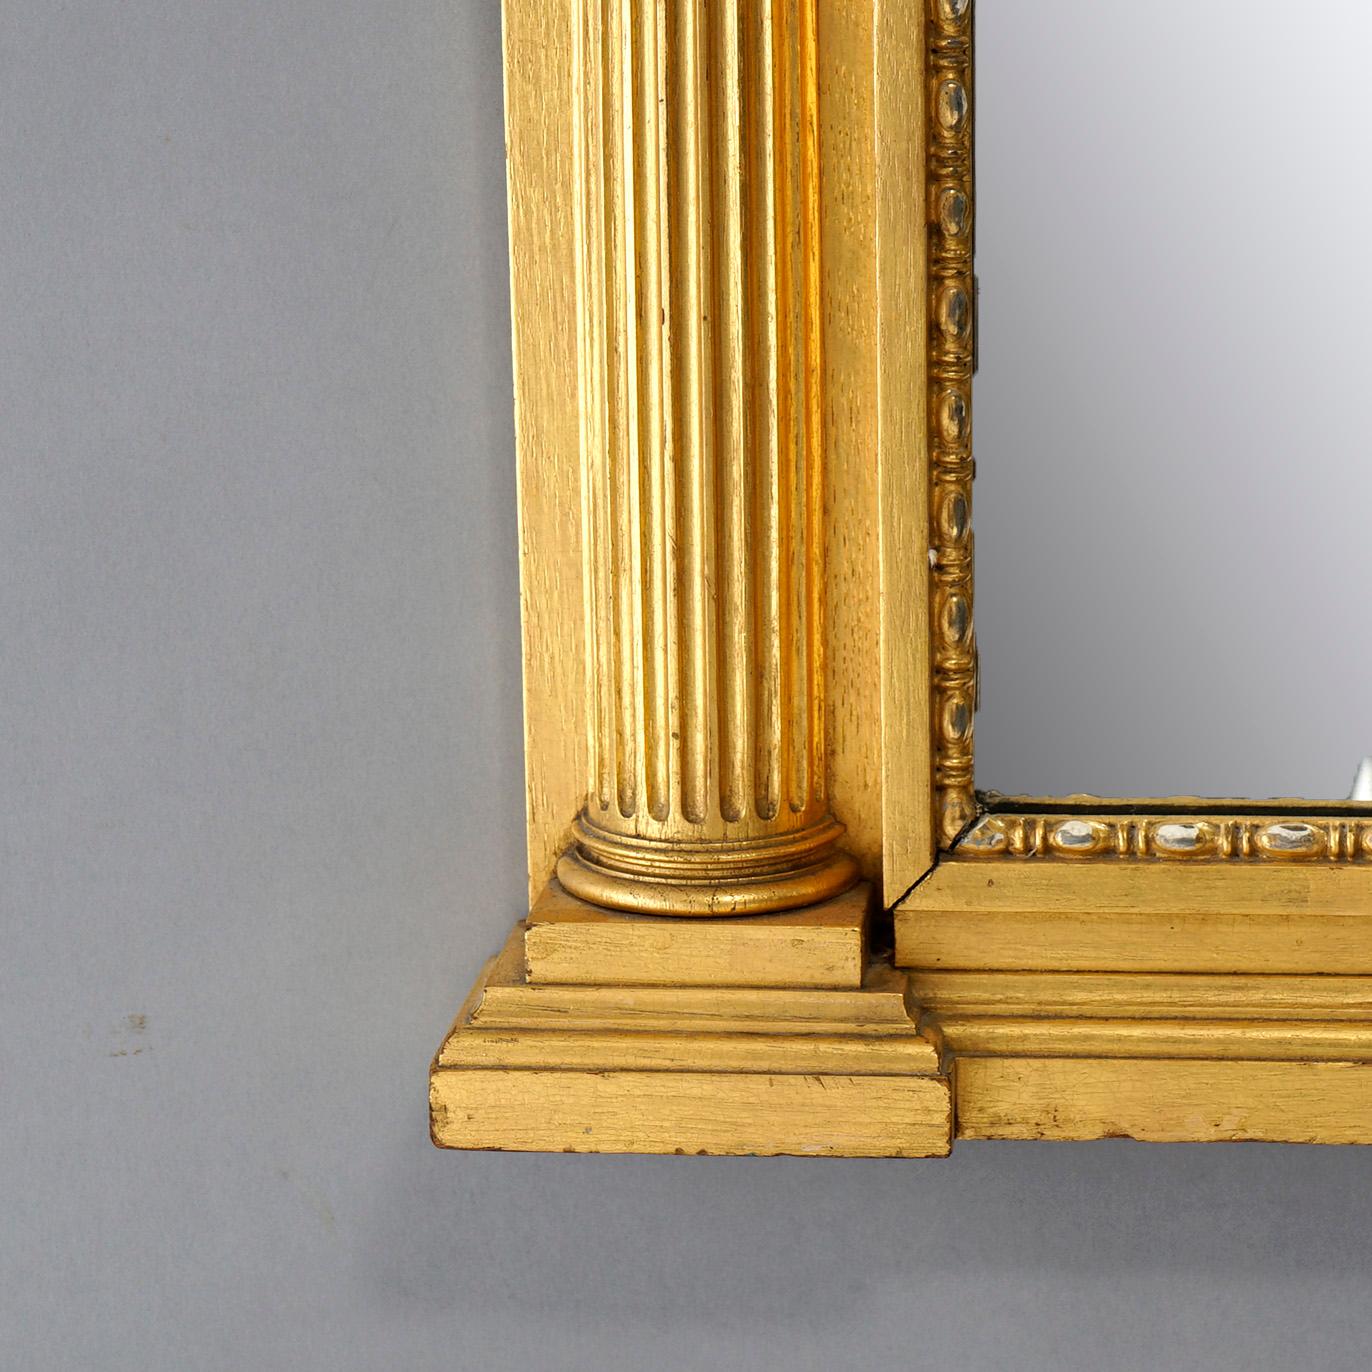 Antique French Empire Classical Greco Style Giltwood Wall Mirror 19th C For Sale 1